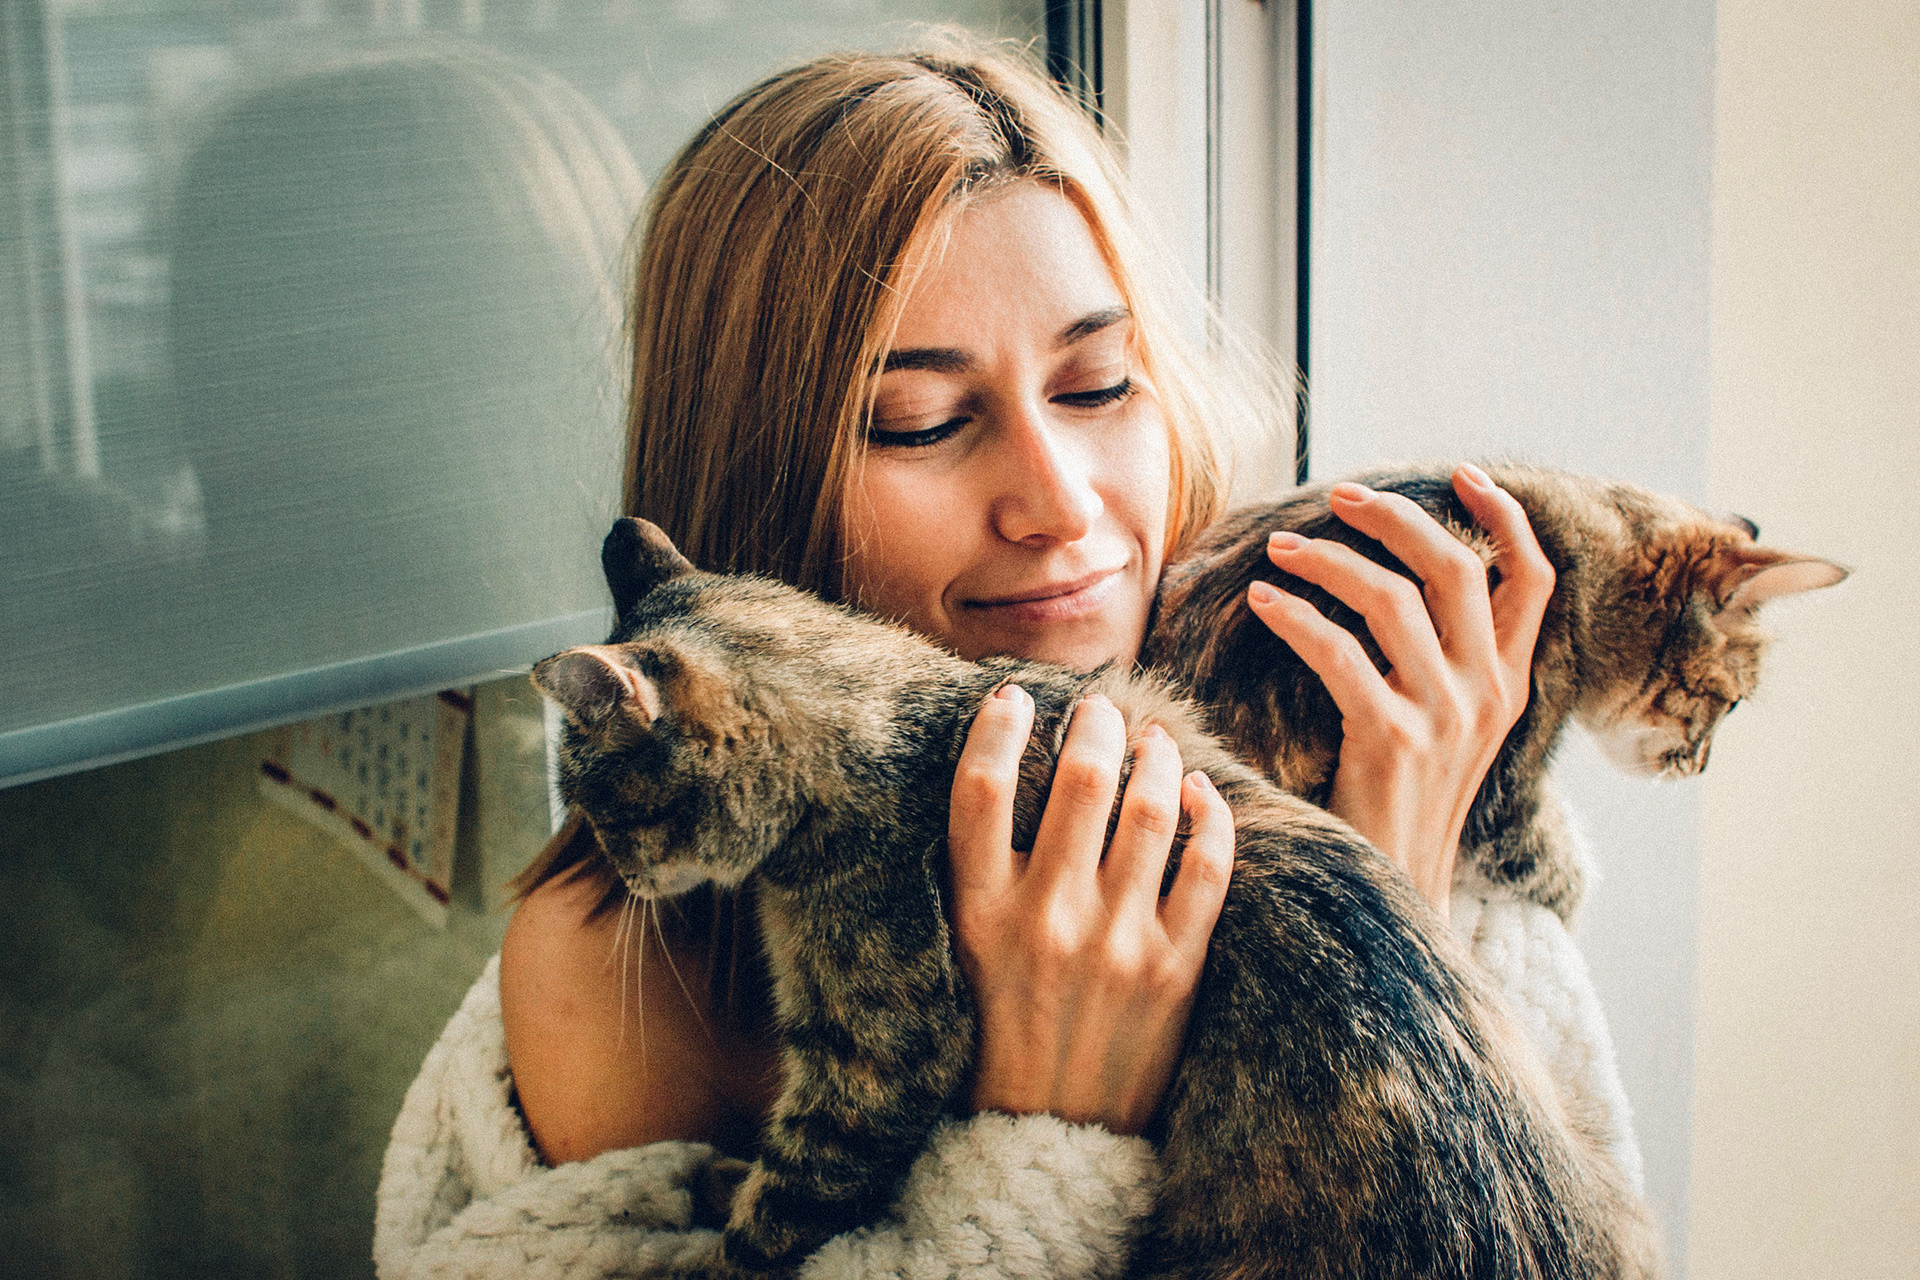 Folklore has widely popularized the following images: A woman who lives alone has many cats (the more cats, the more the situation is out of control).